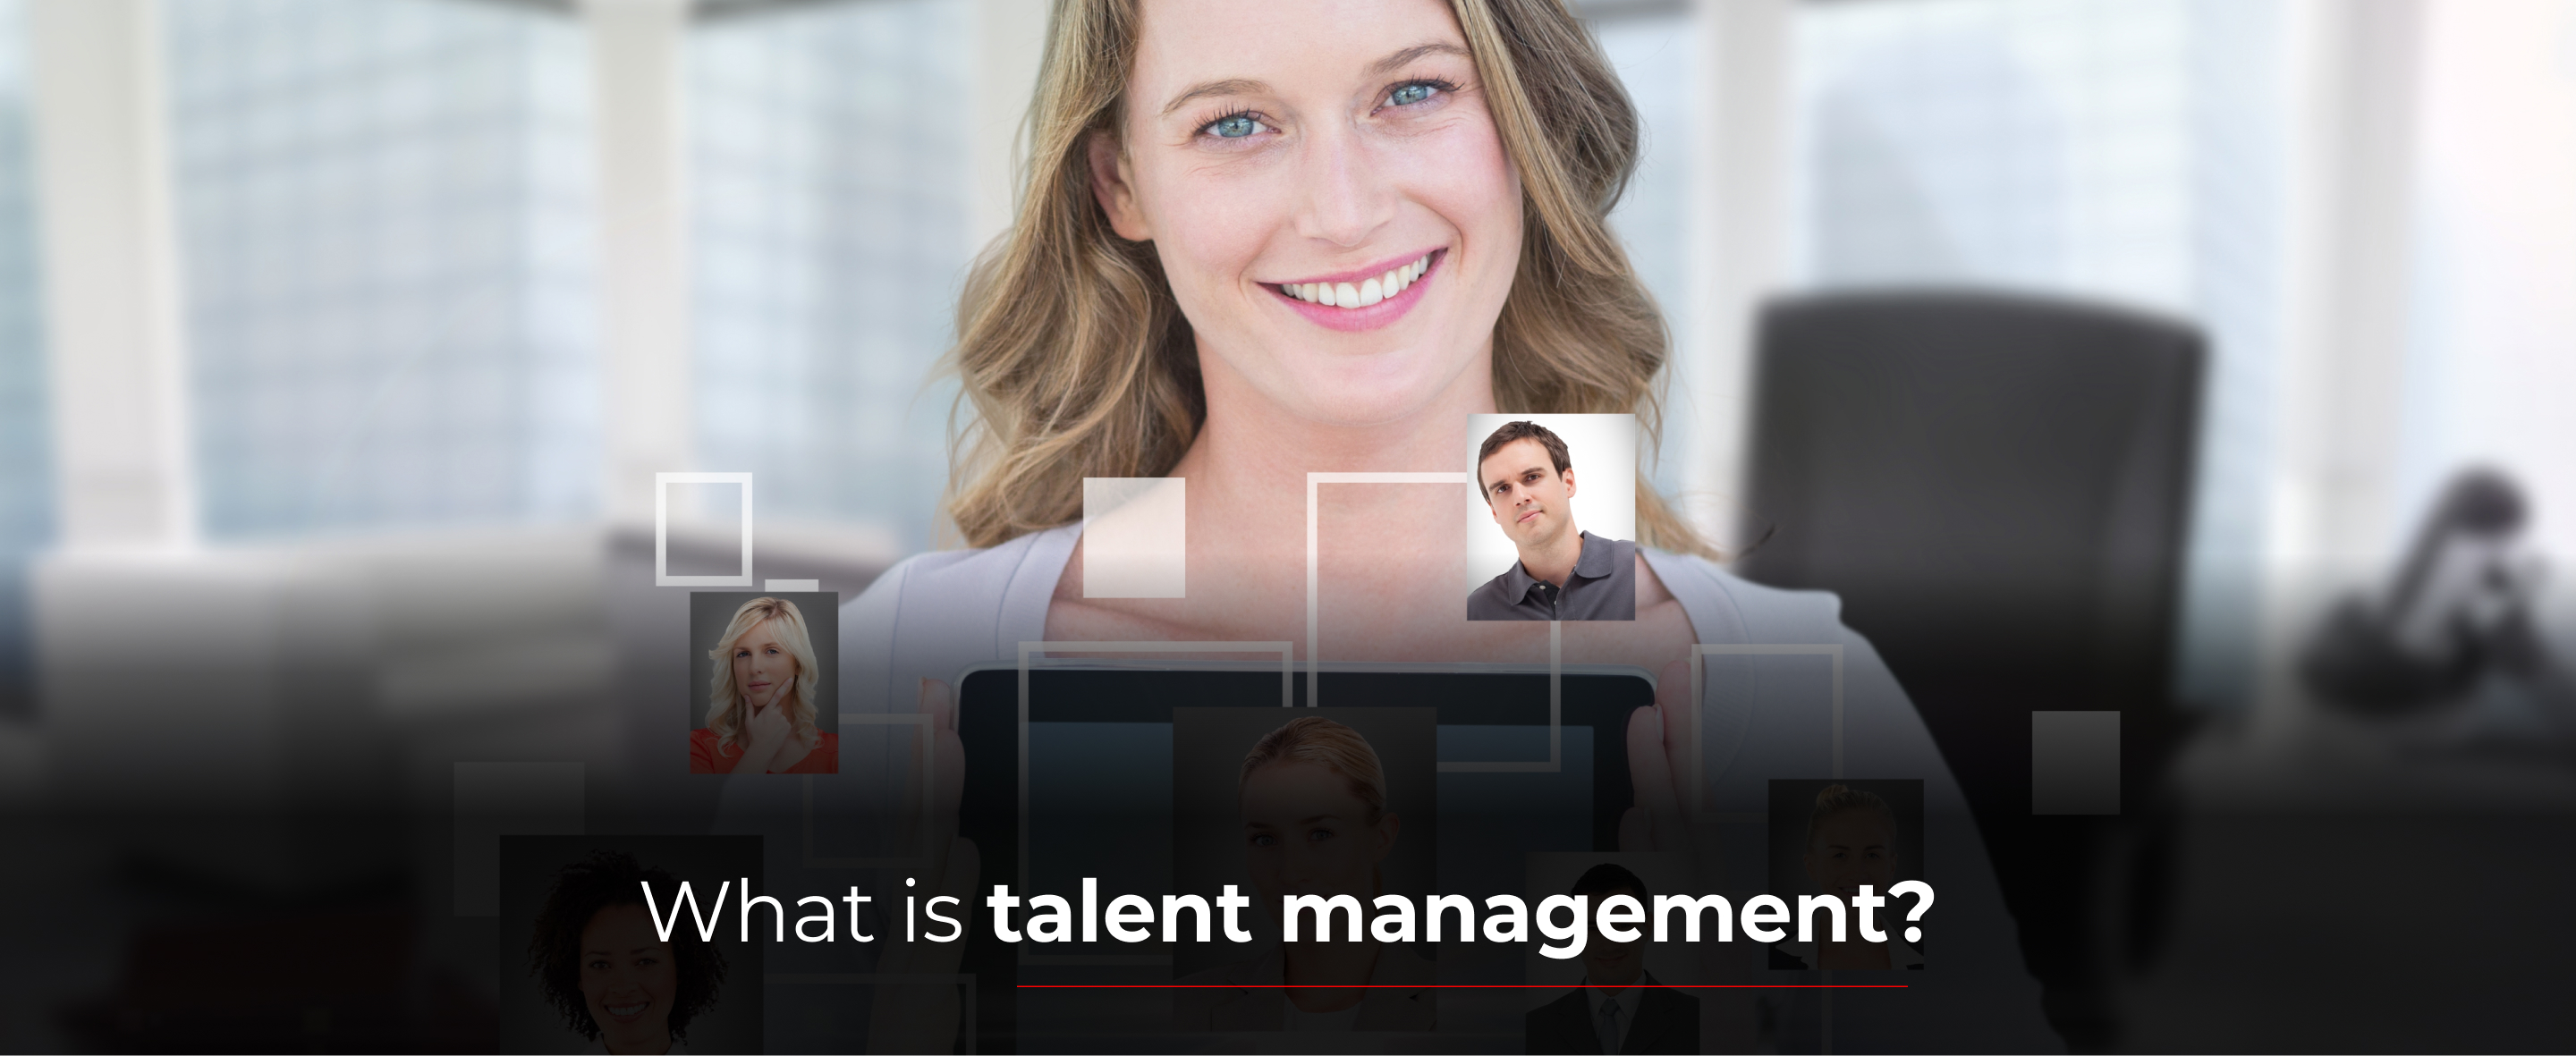 What is talent management?